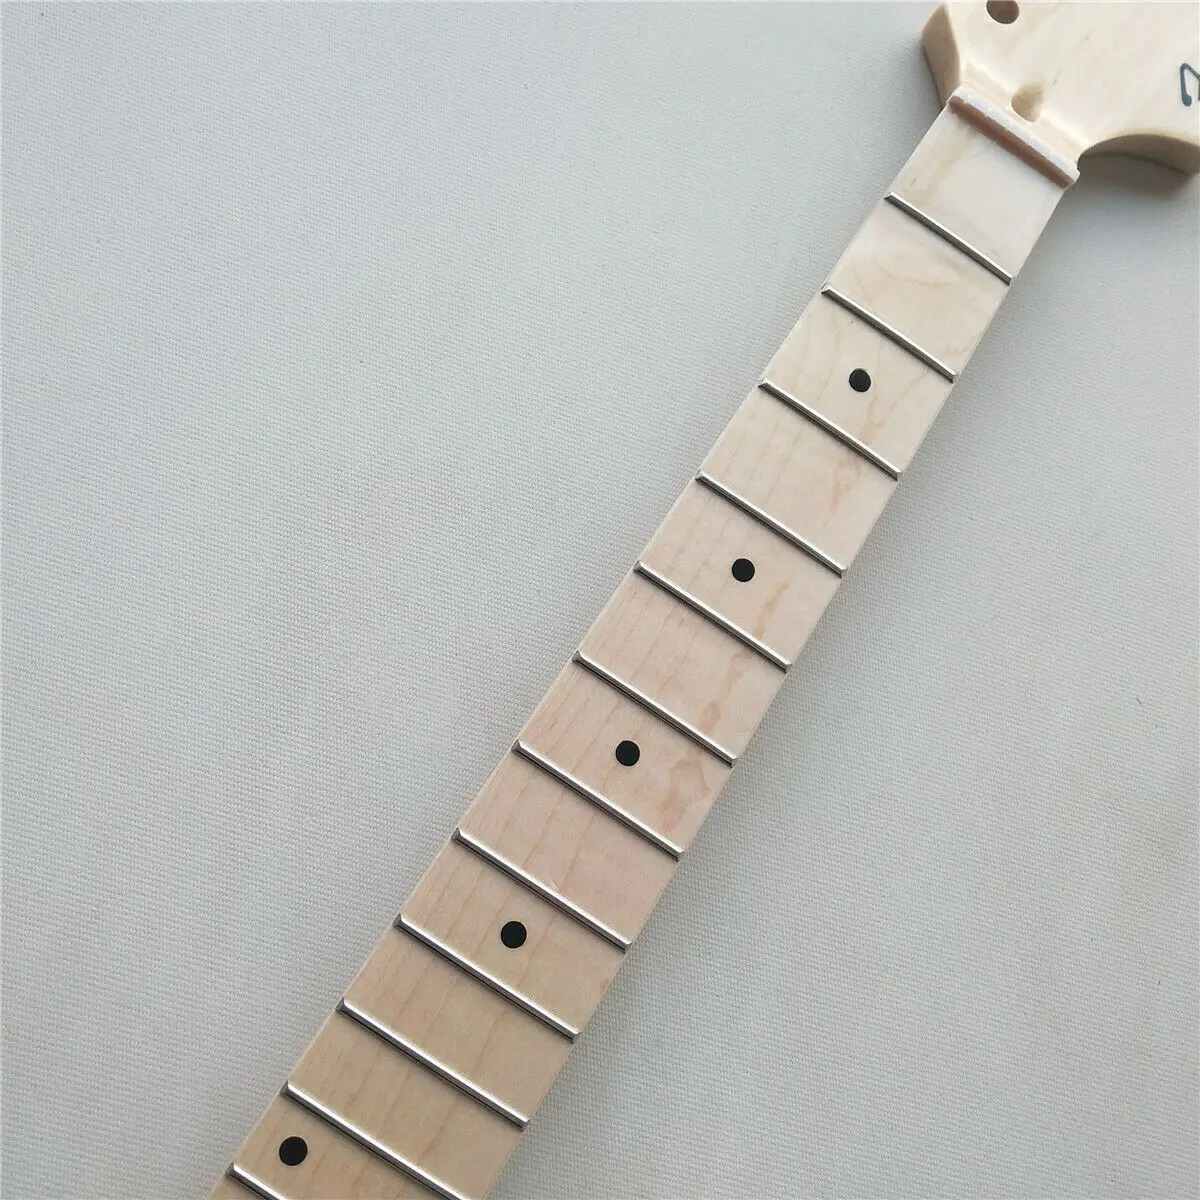 22 fret 25.5 inch Big head Guitar neck Maple Maple Fingerboard dot Inlay Gloss New Replacement enlarge